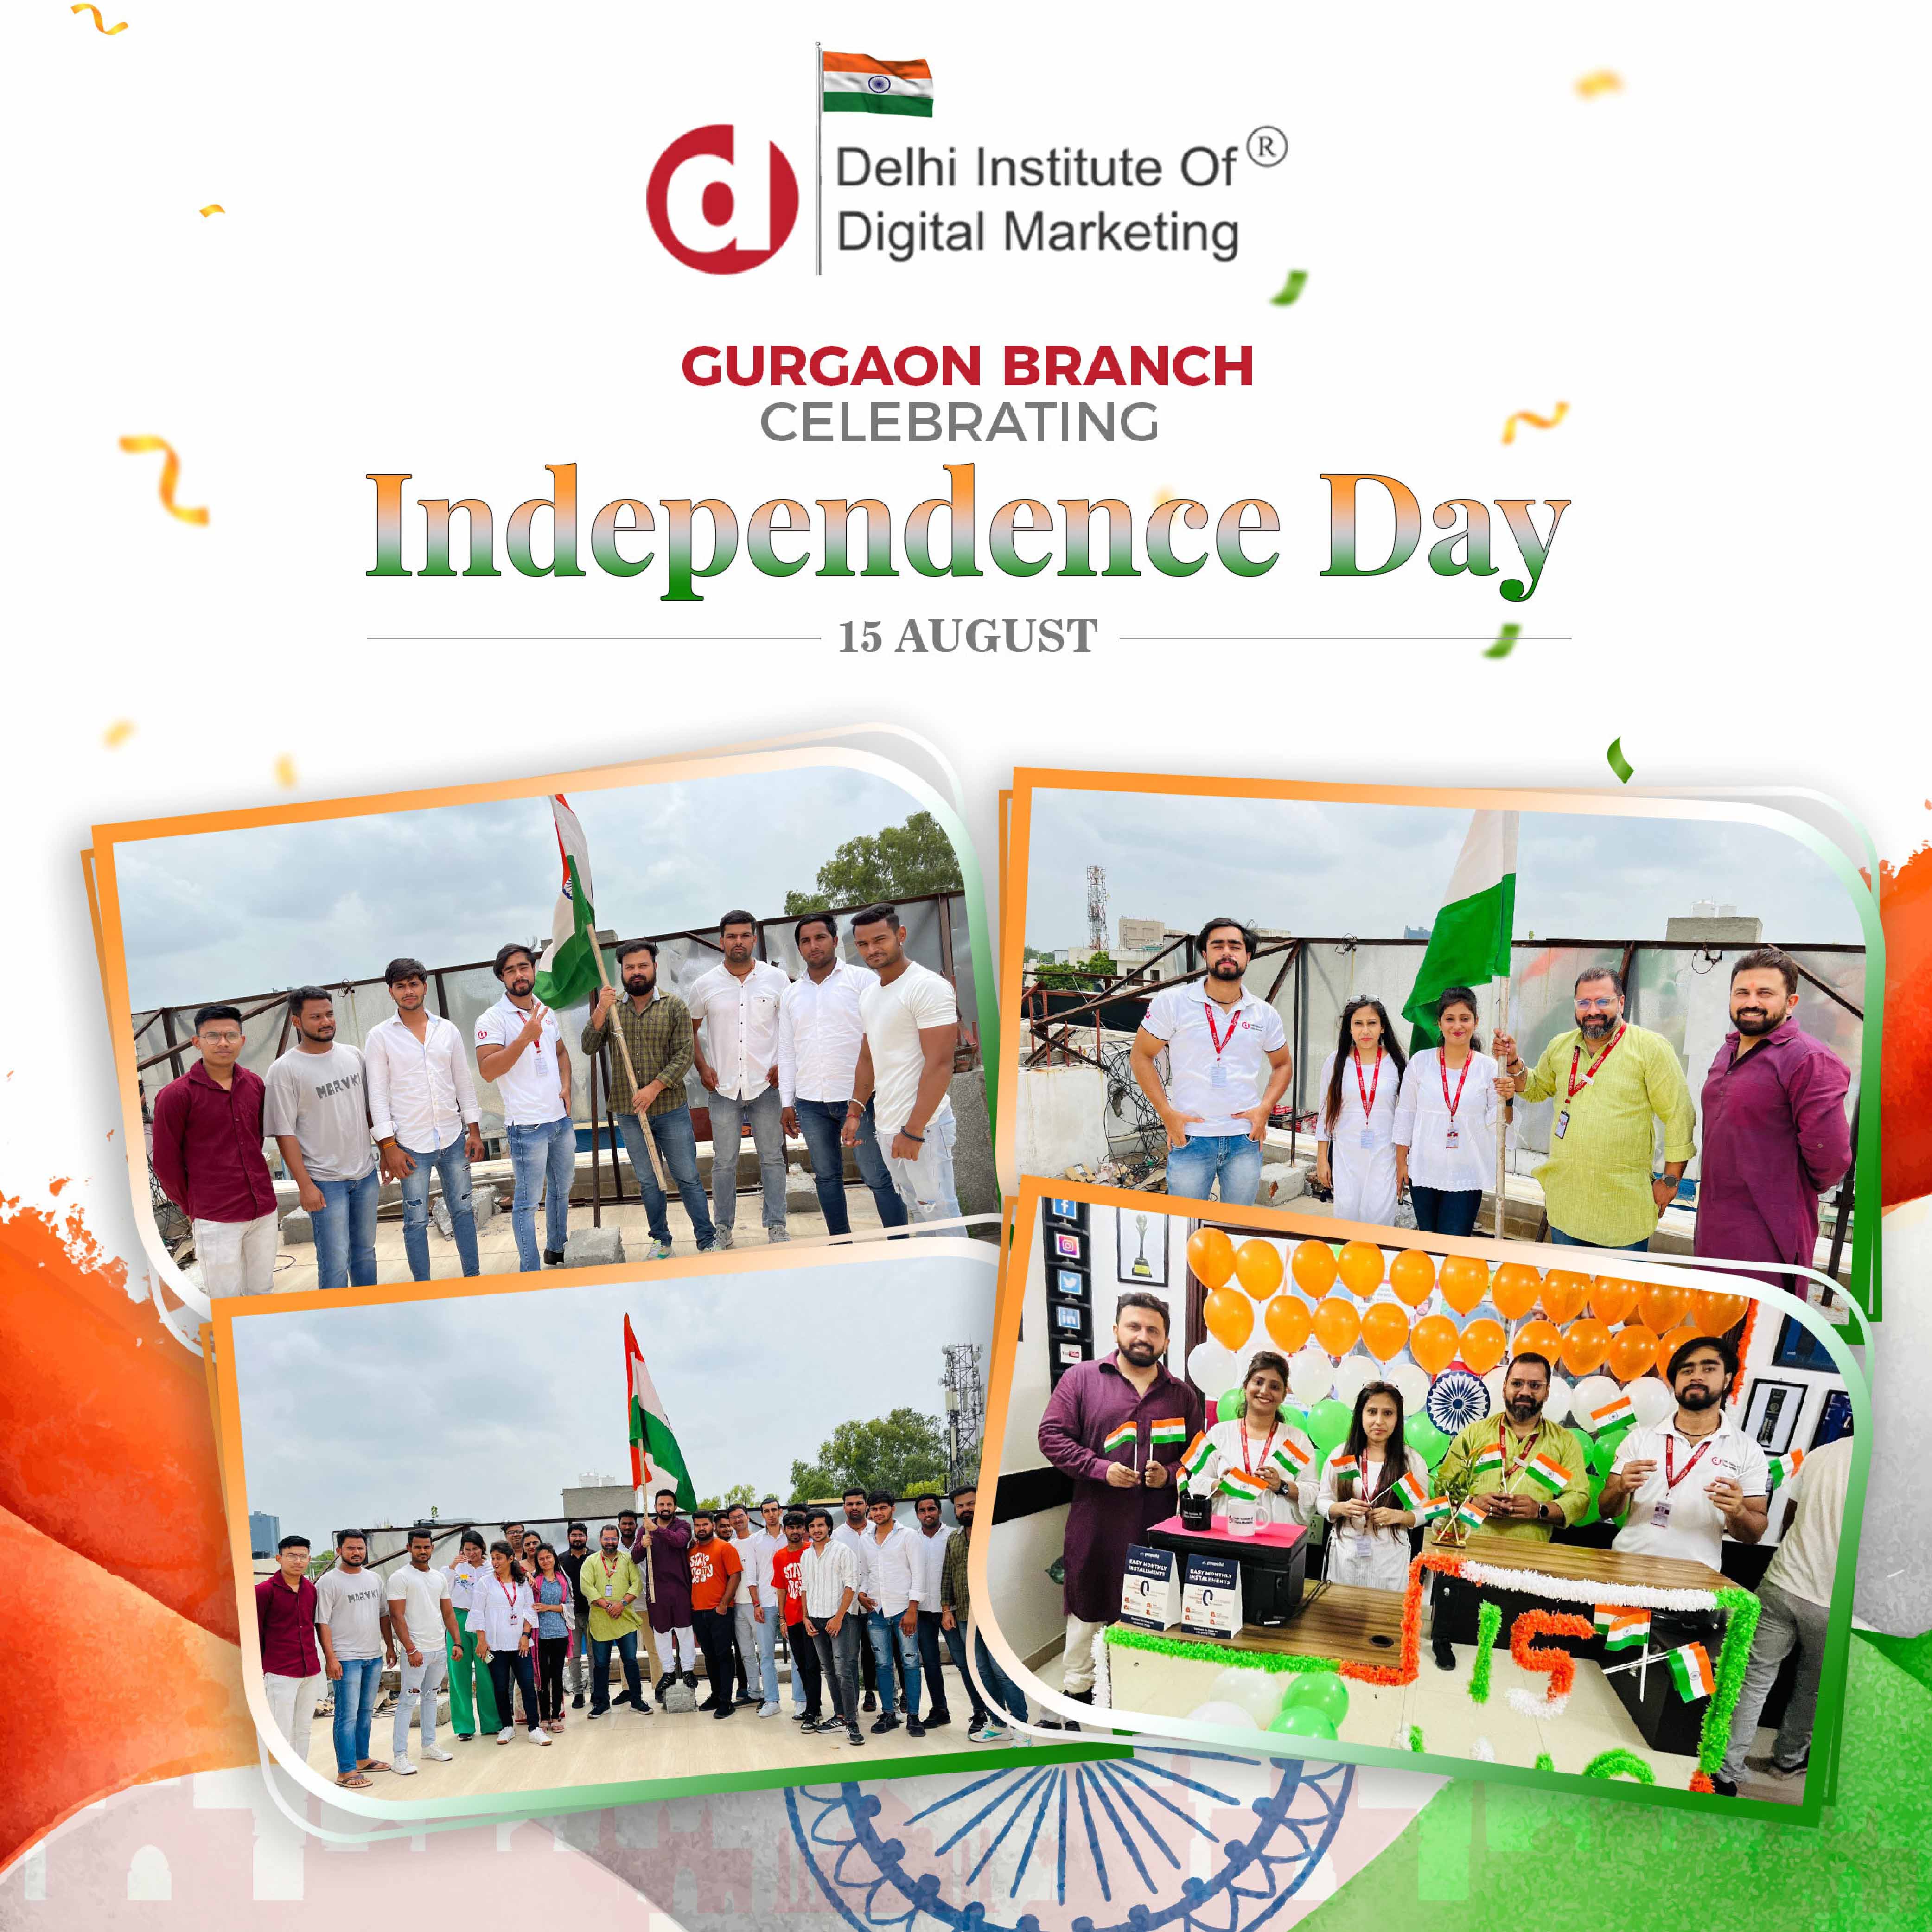 DIDM Gurgaon Branch is celebrating its 77th Independence Day